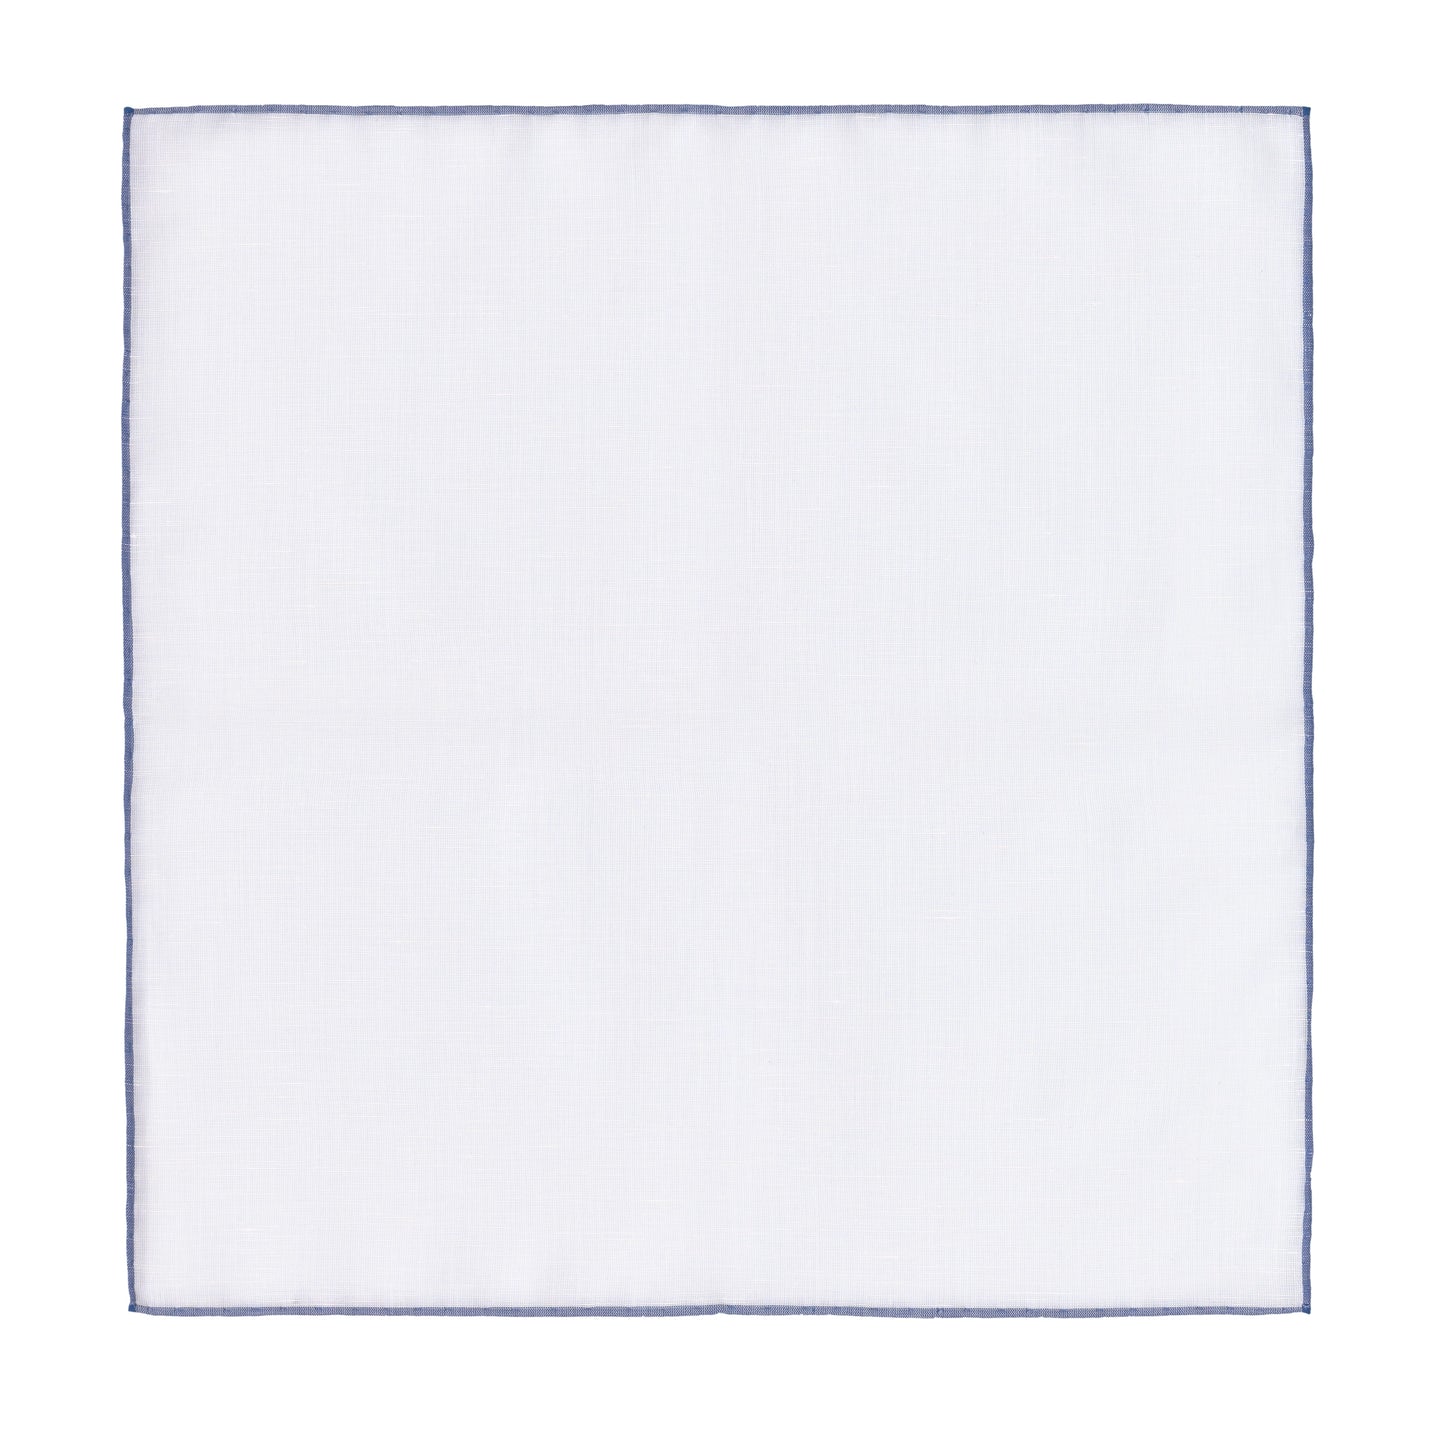 Cotton Blend Pocket Square in White with Blue Edges